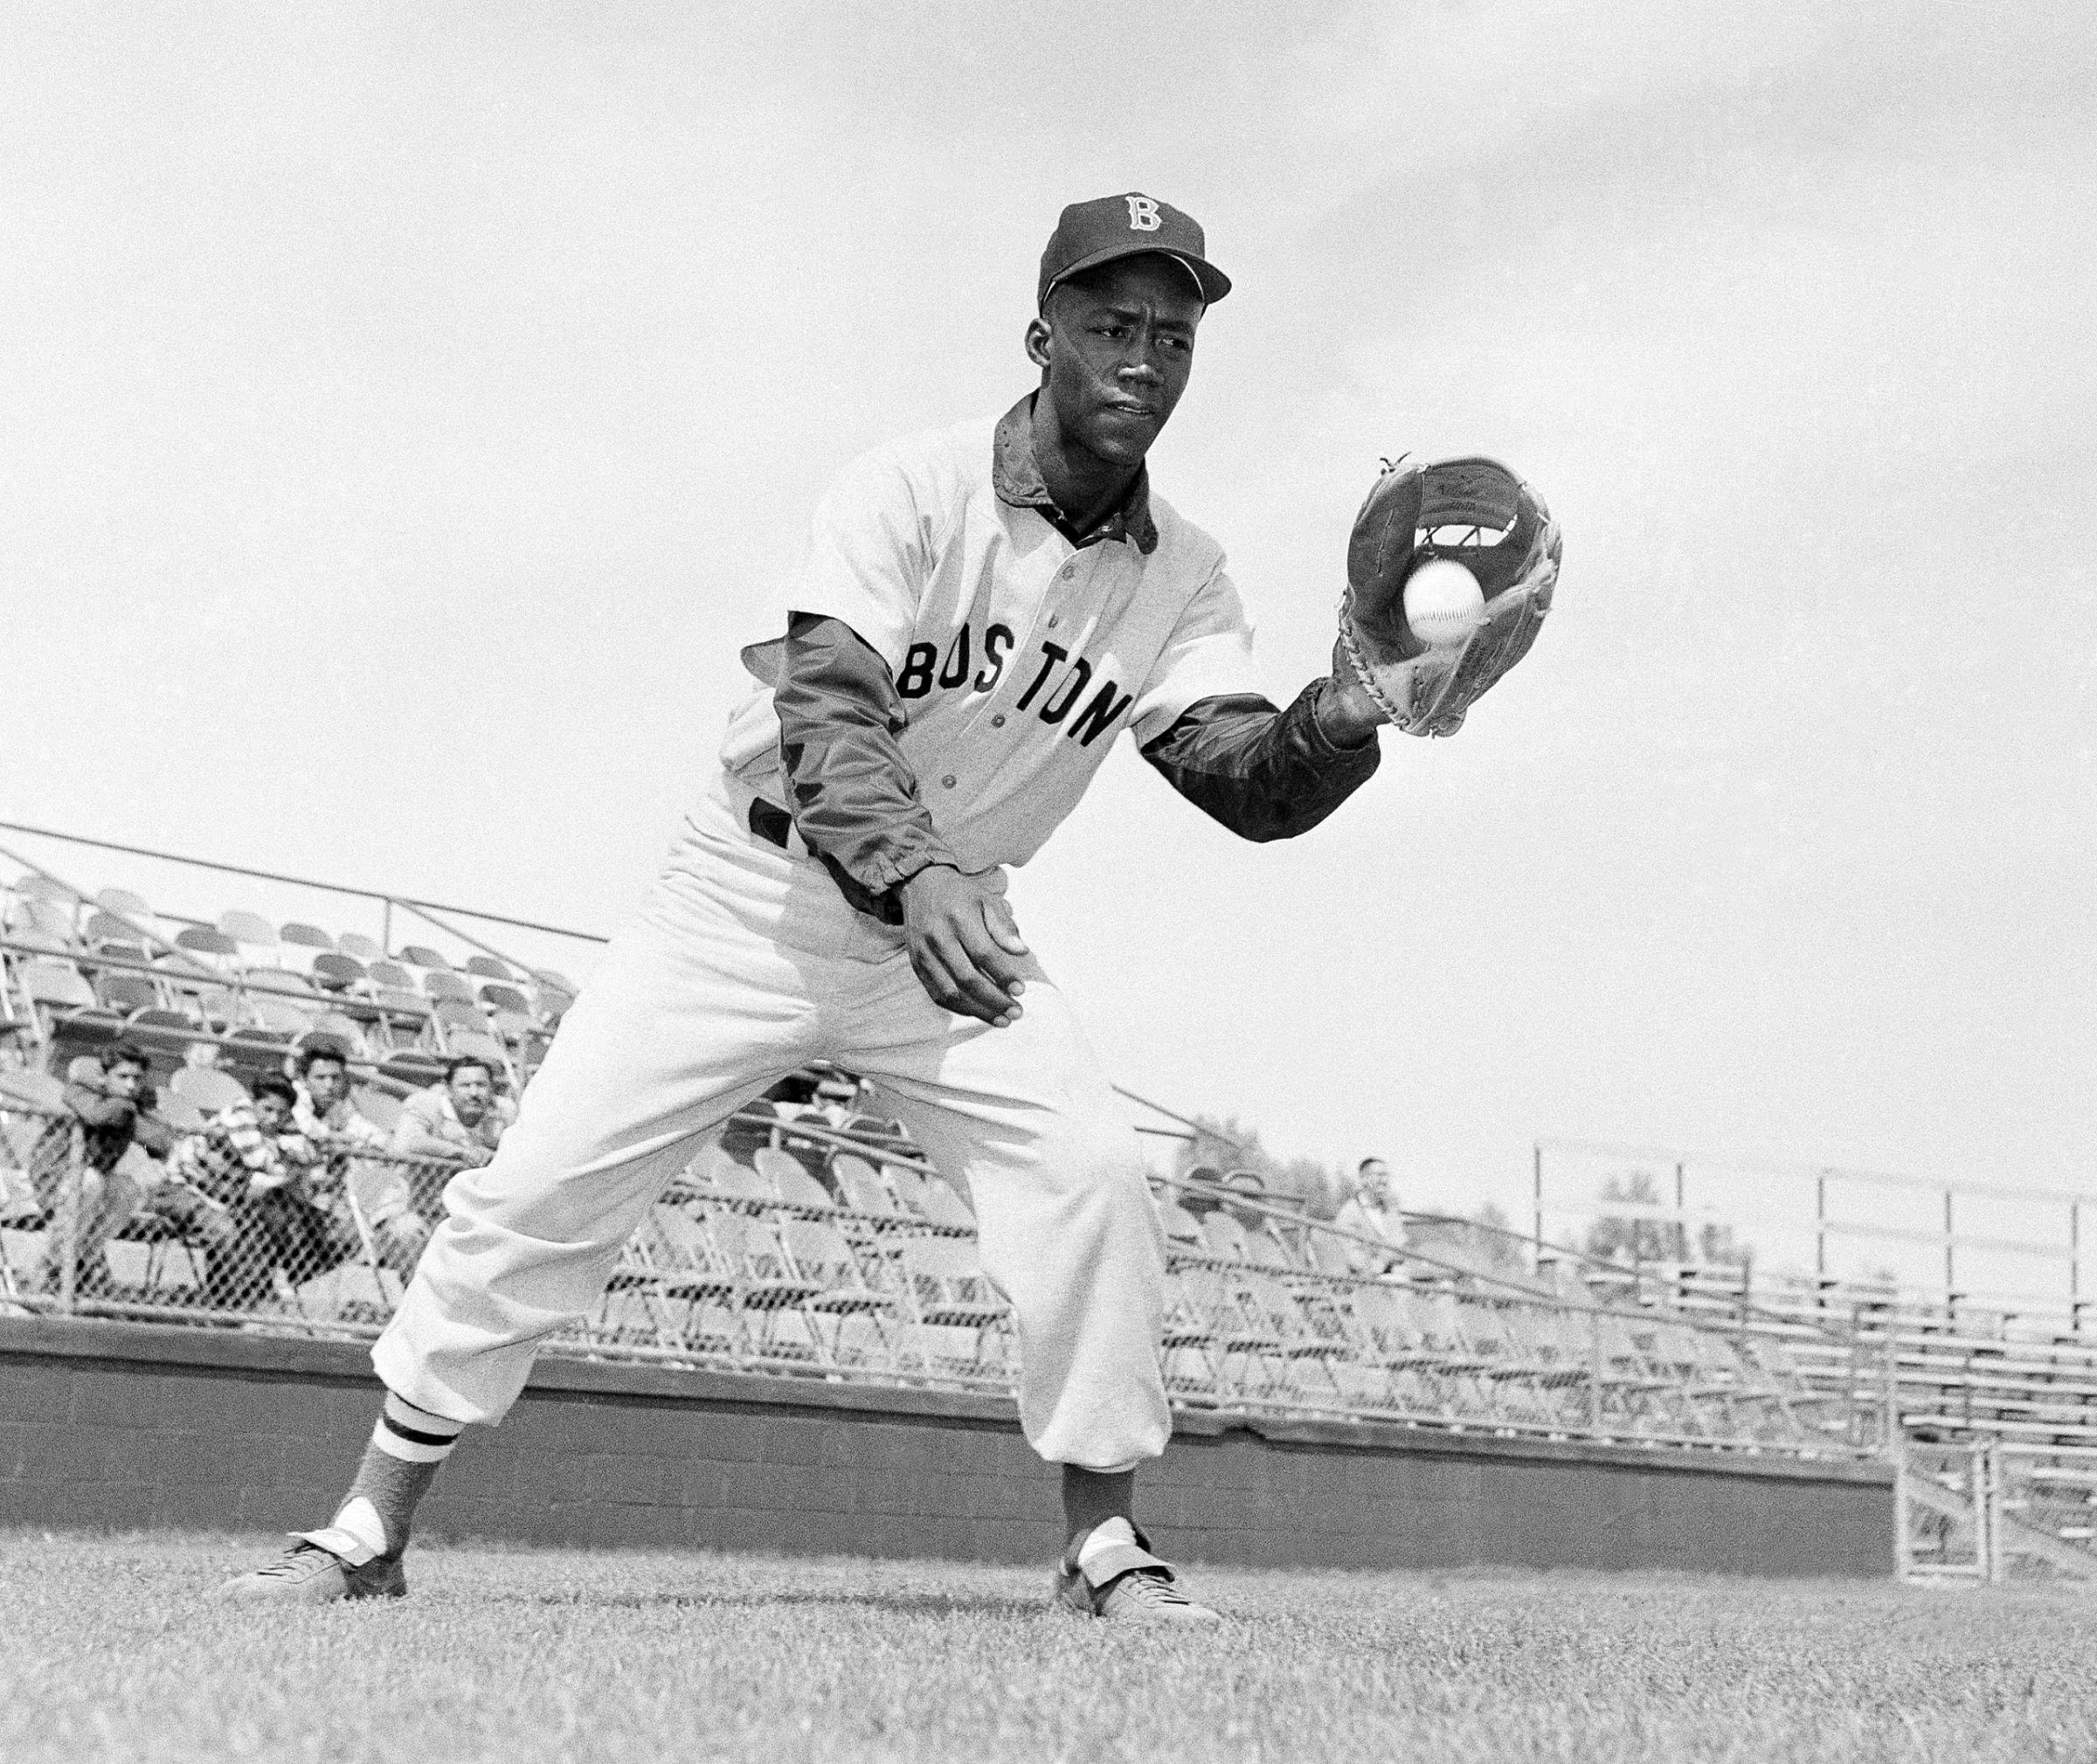 Elijah Pumpsie Green, of the Boston Red Sox, shown in action, April 20, 1959.